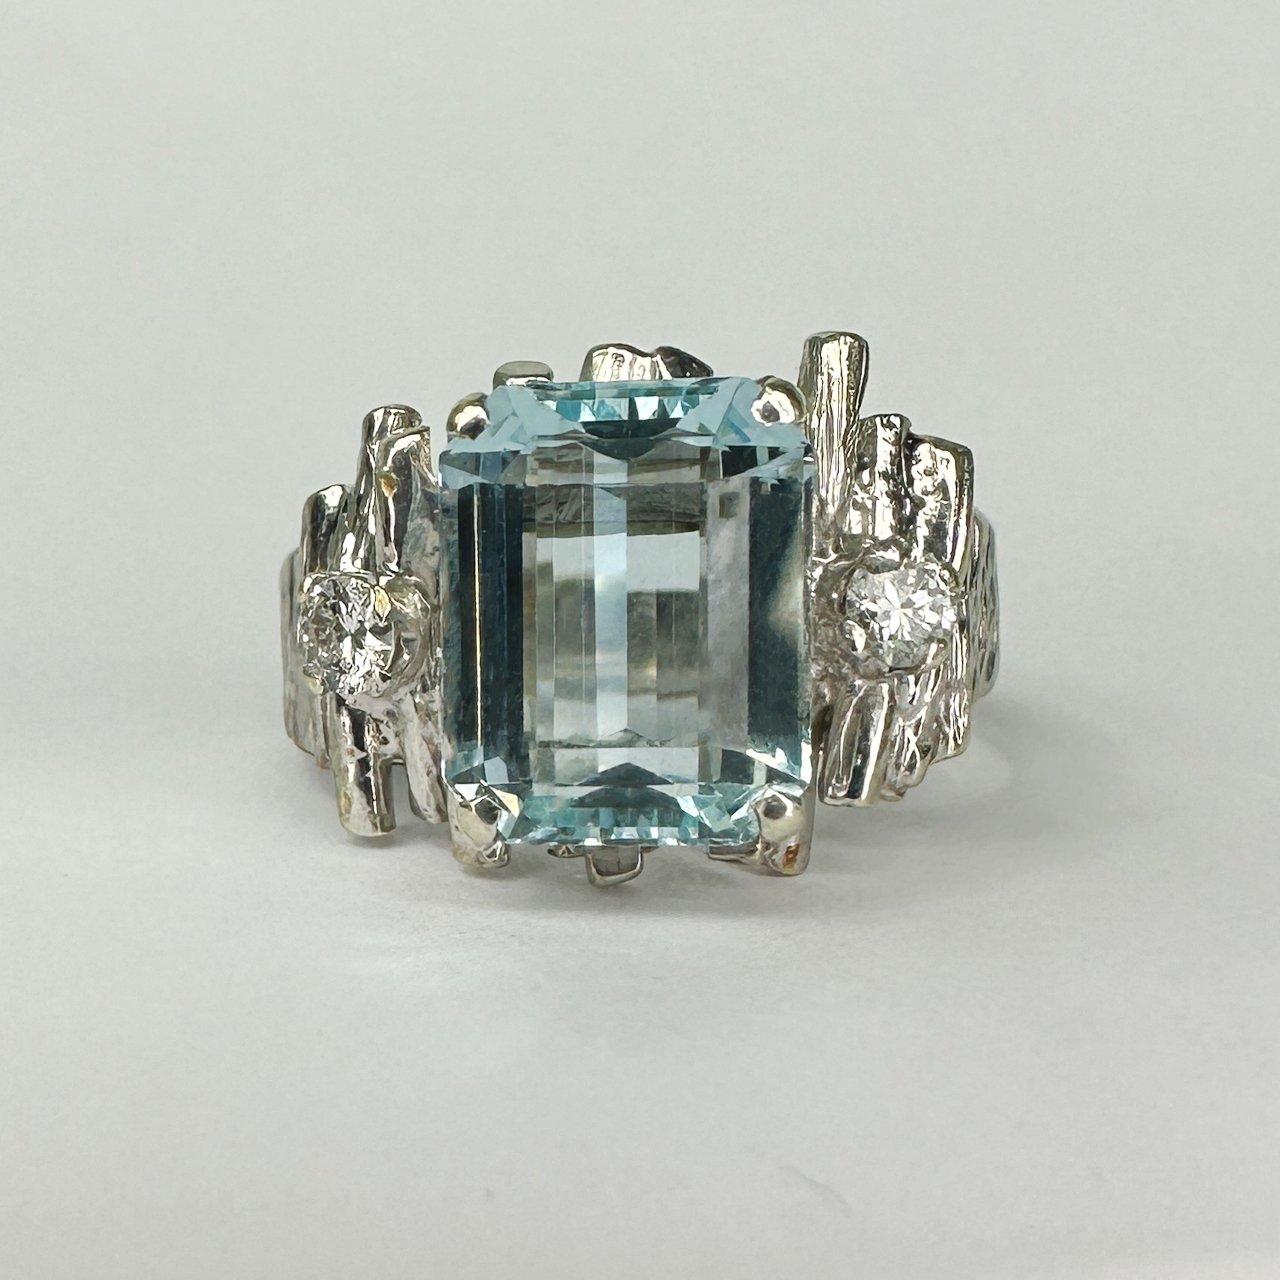 Aquamarine and Diamond Bark Textured White Gold Ring. 1970's bark construction with a beautiful aquamarine centre stone measuring 10mm long x 8mm wide x 5mm deep, flanked on either side by 2 bright brilliant cut diamonds . The ring looks amazing on the finger and comfortable to wear. All stones are claw set. A fantastic vintage ring with style factor. The ring can be resized, contact us for further information or chat about this lovely ring.